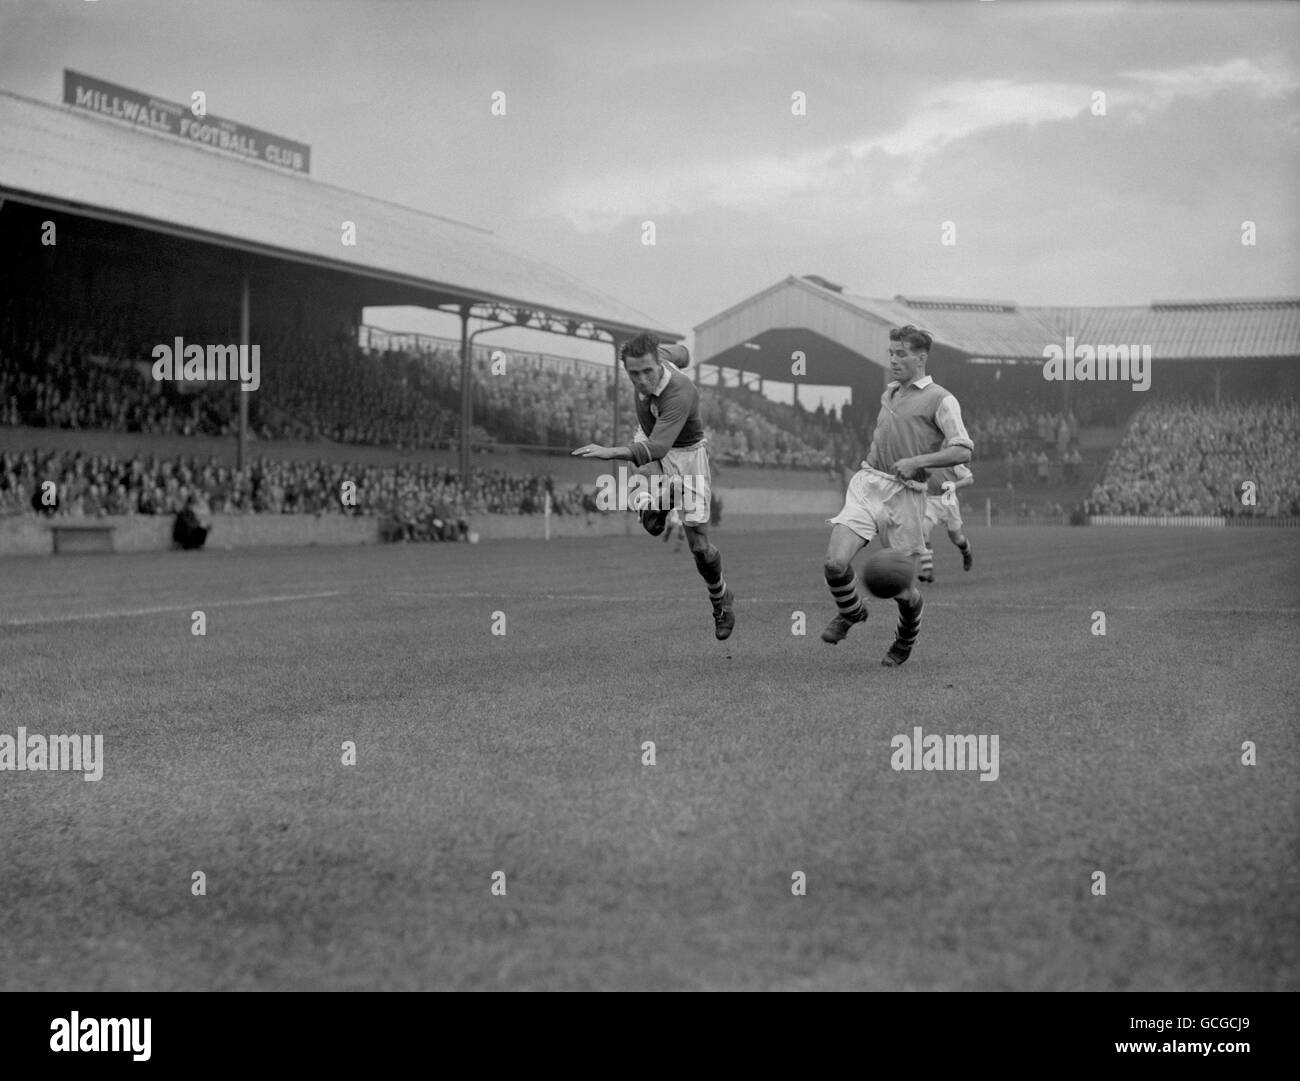 Soccer - League Division Three South - Millwall v Coventry City - The Den  Stock Photo - Alamy